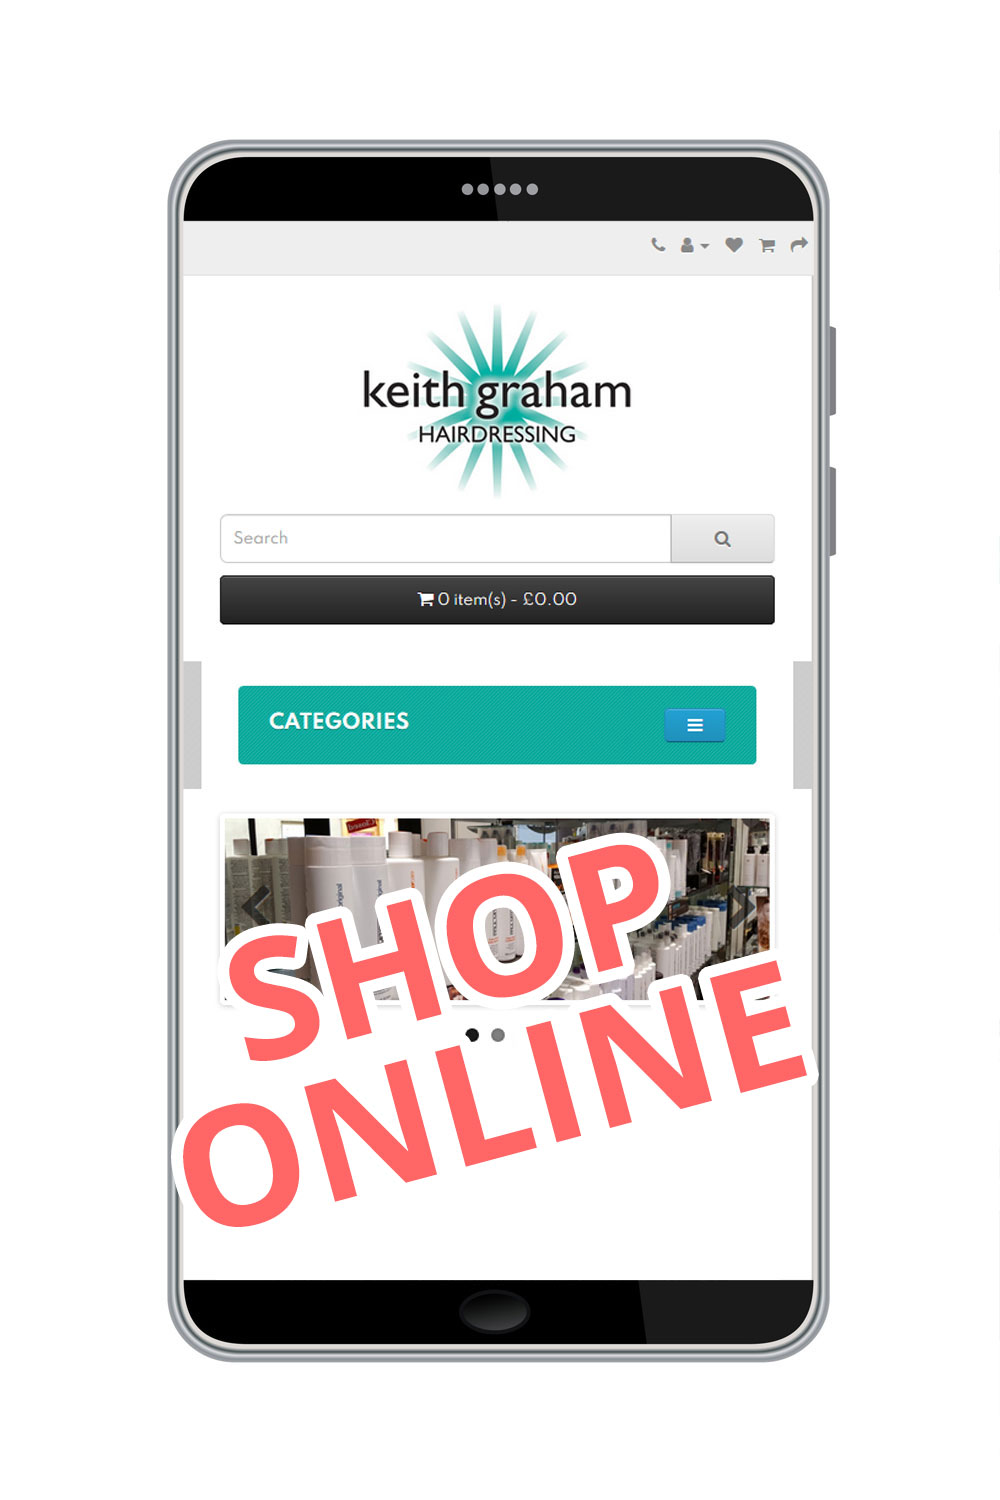 Image of the Keith Graham Hairdressing online shop displayed on a mobile phone